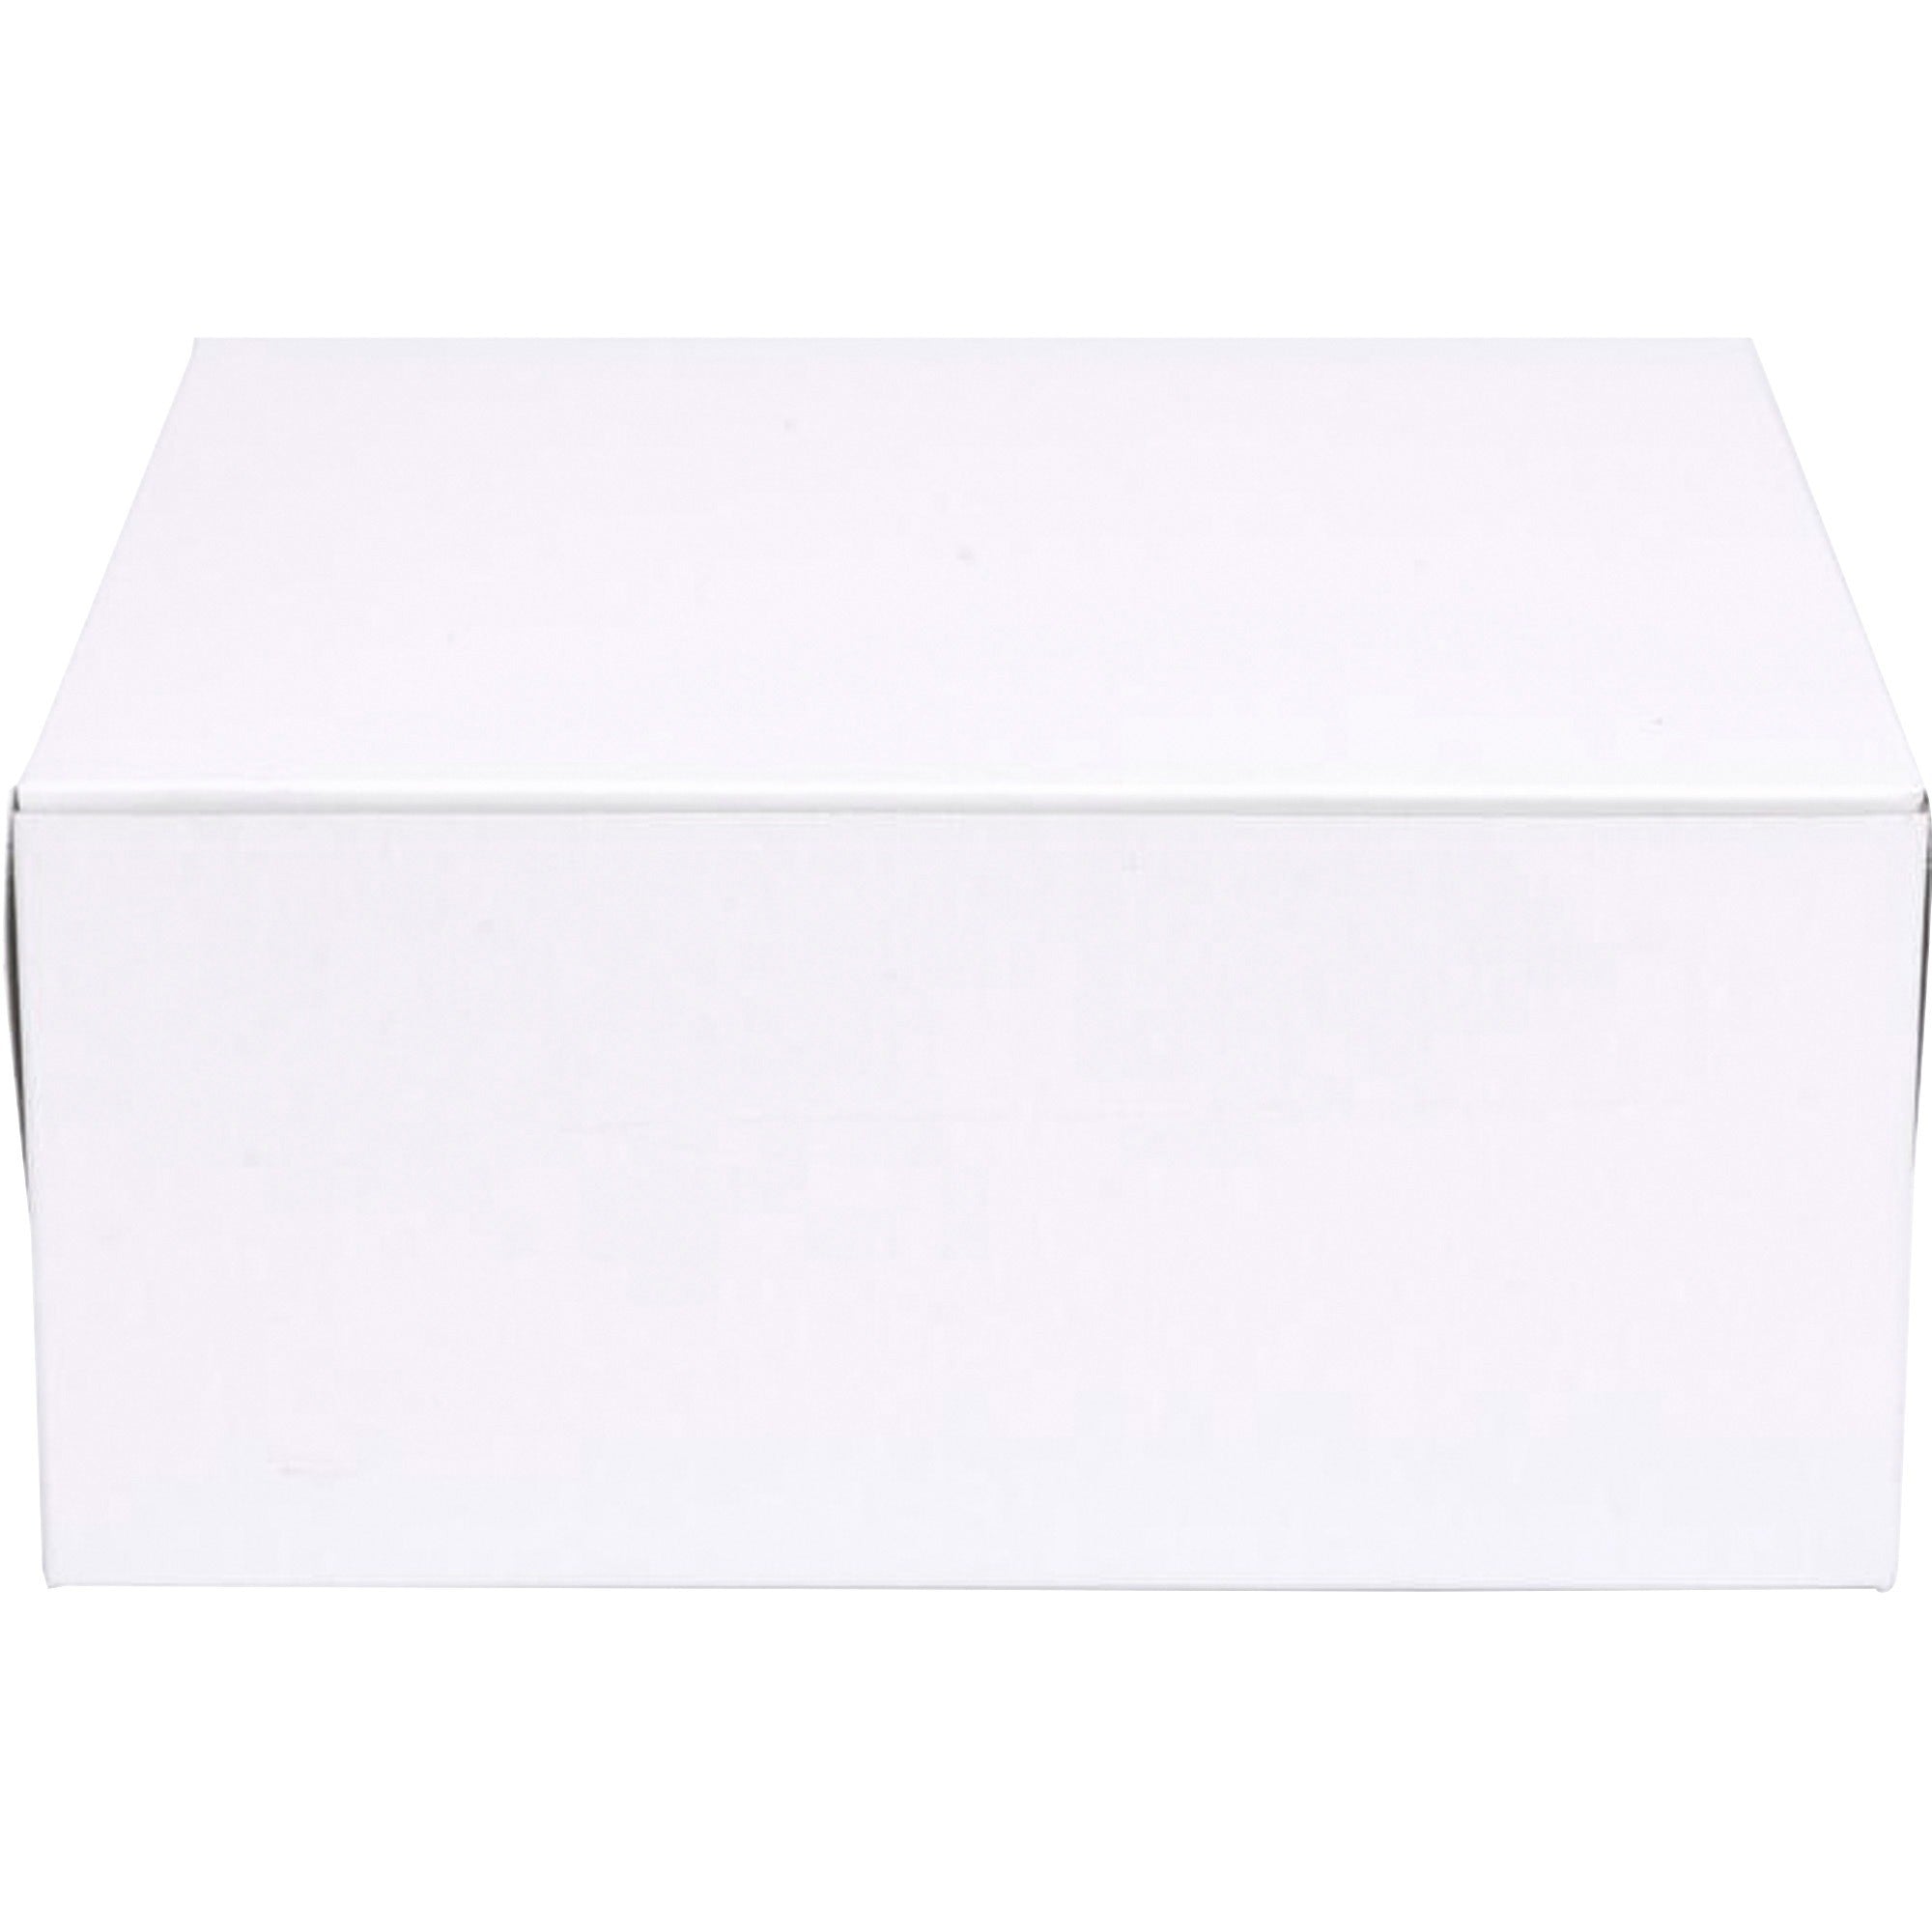 sct-standard-bakery-boxes-external-dimensions-9-width-x-4-depth-x-9-height-standard-duty-paperboard-white-for-storage-transportation-bakery-200-carton_egs159325 - 1